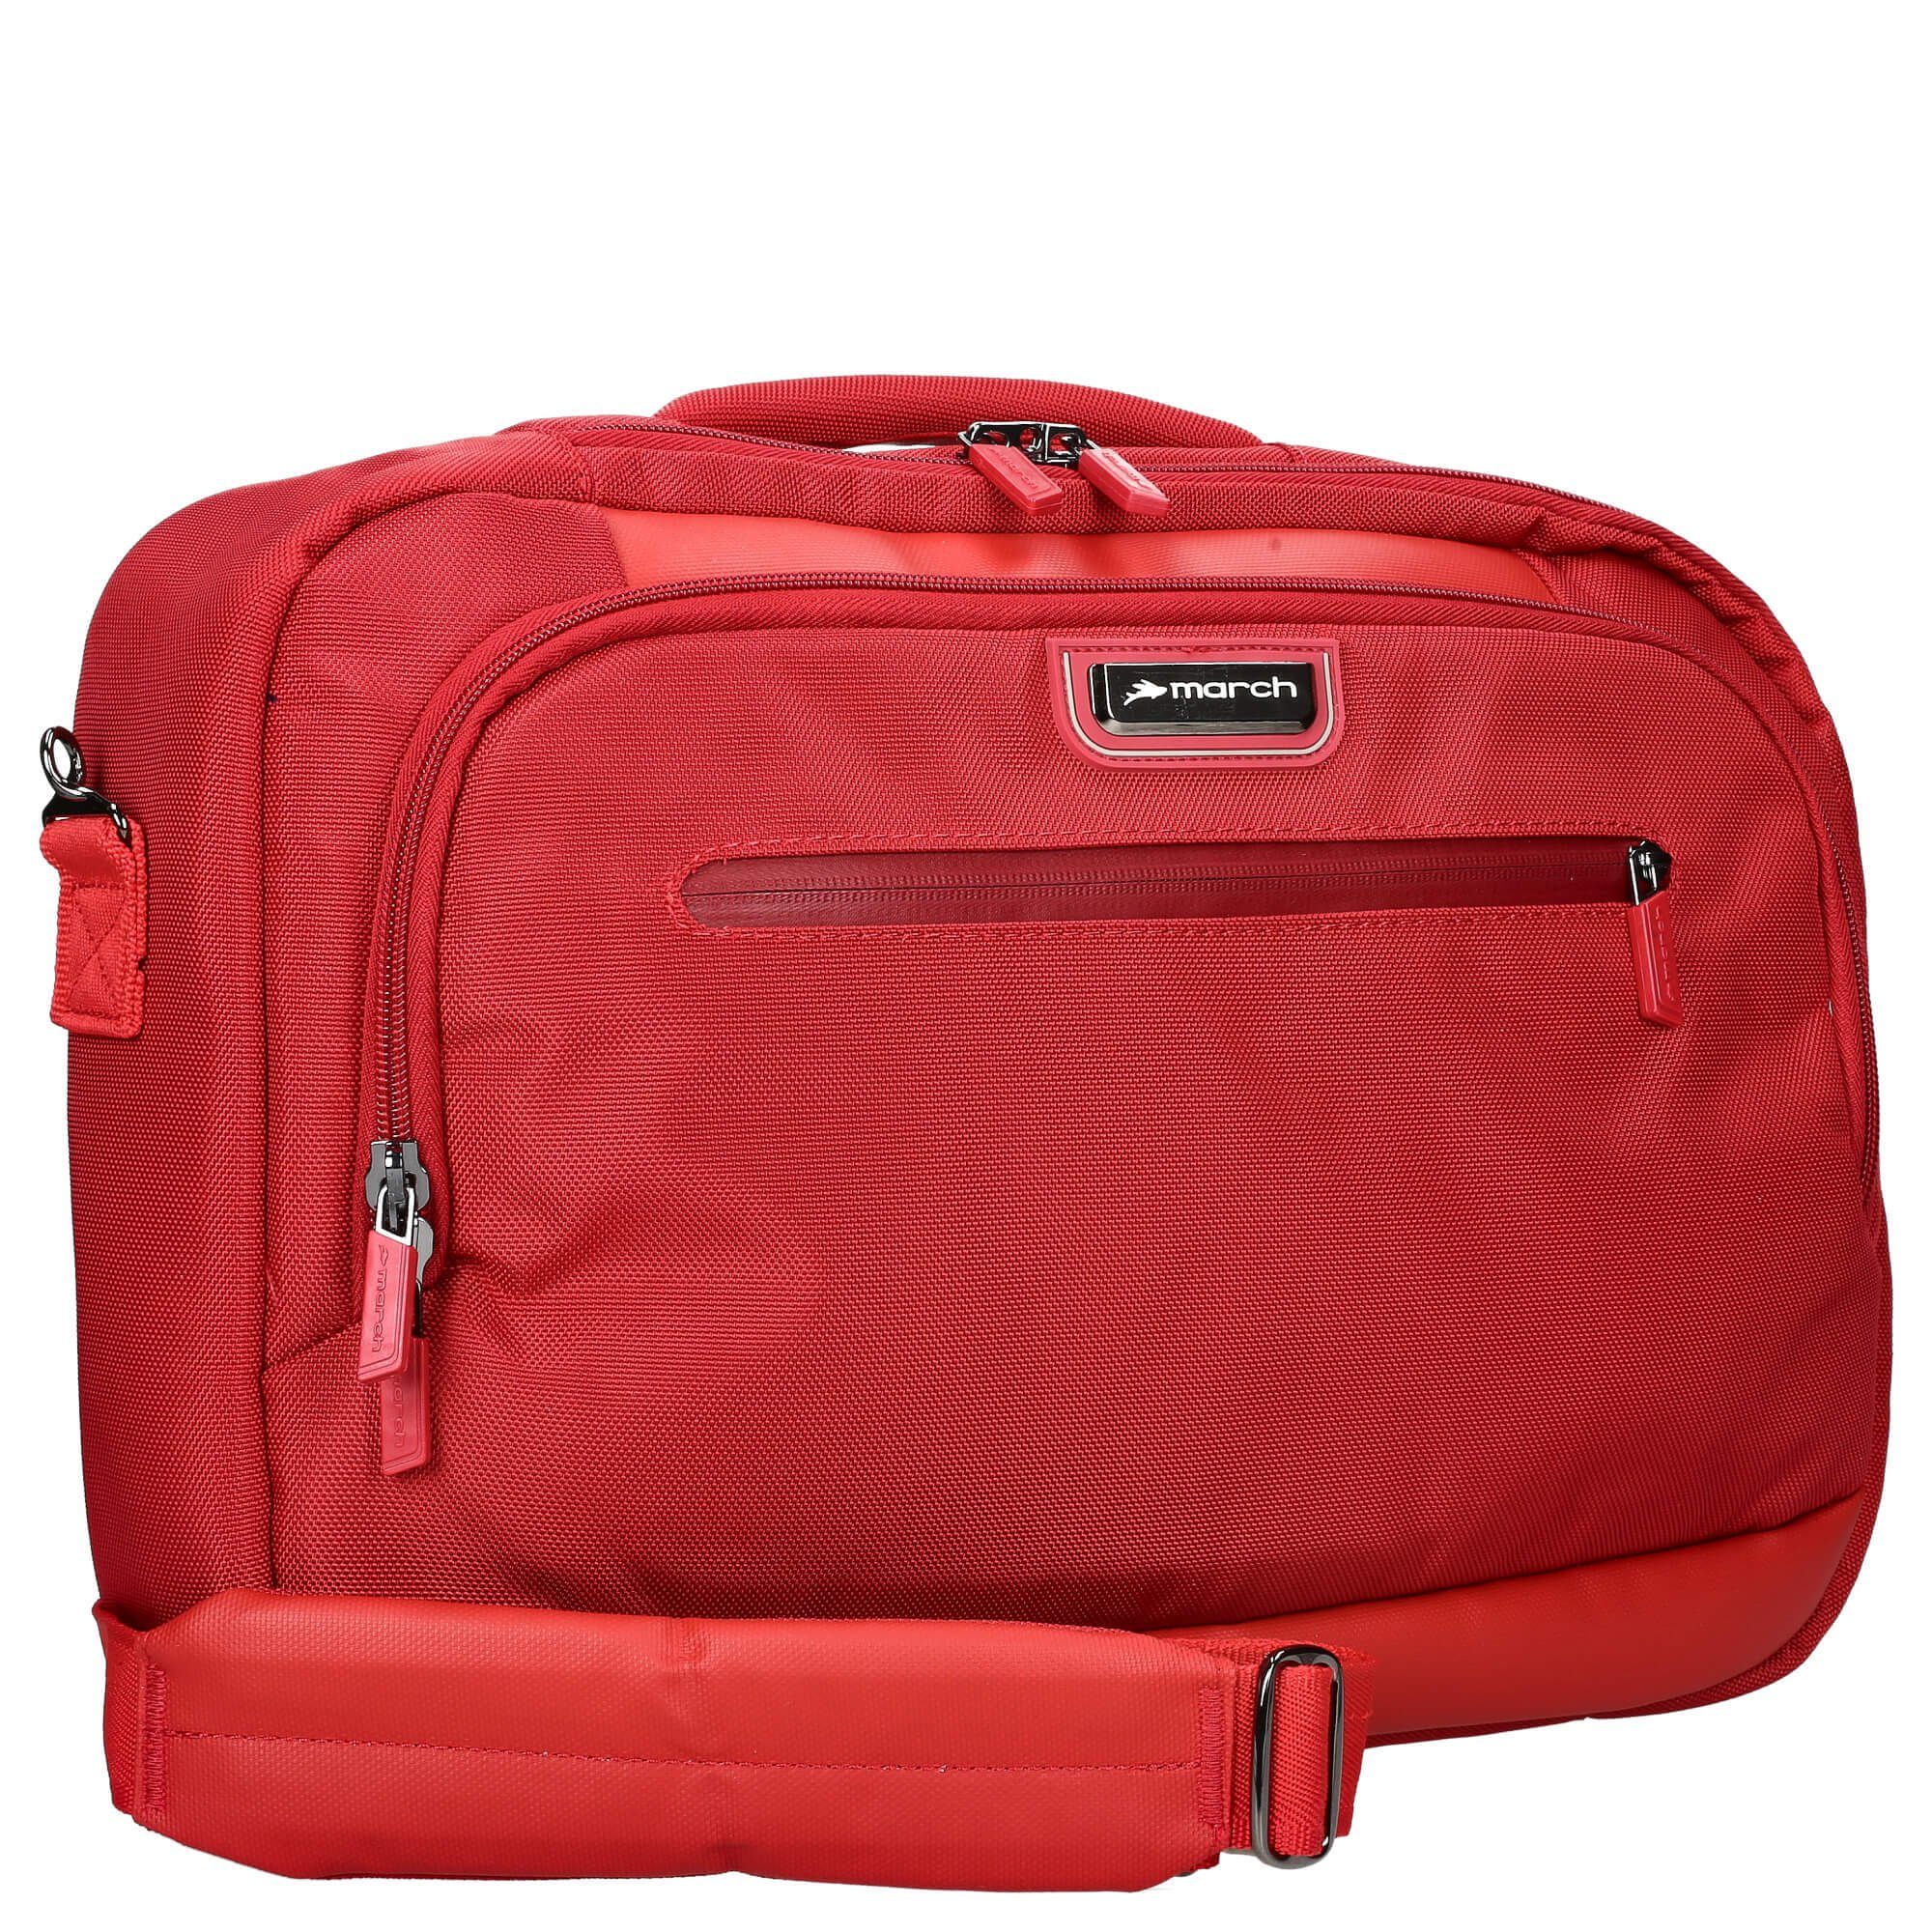 March15 Trading Businesstasche Rolling Bags Away take cm Laptoptasche 42 - red